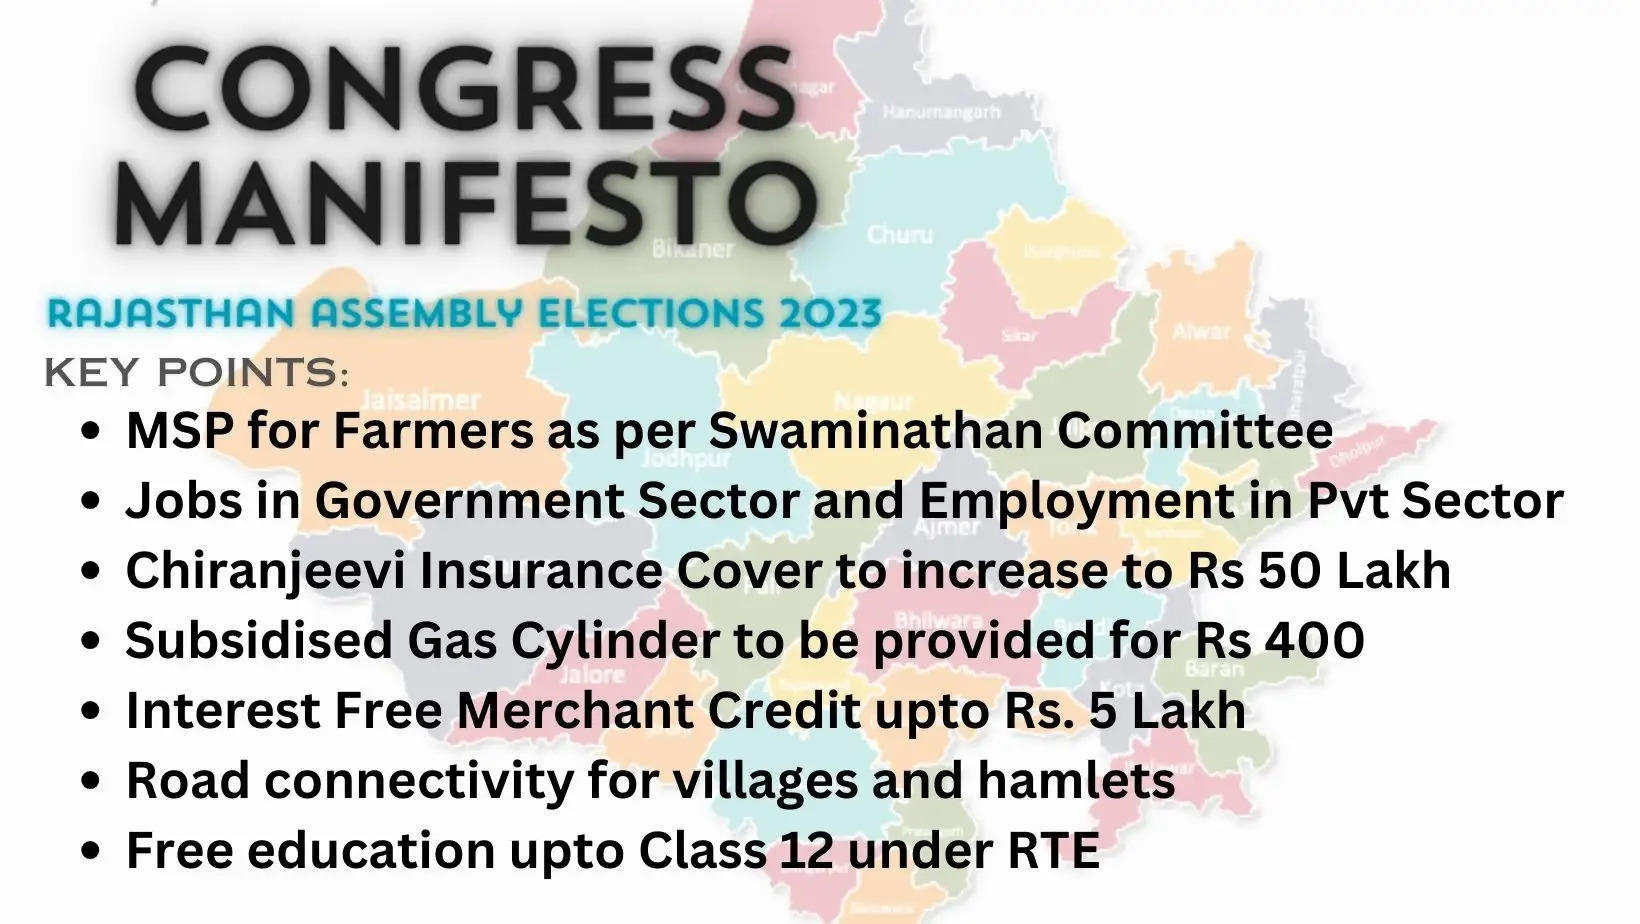 Congress Manifesto Rajasthan Assembly Elections 2023